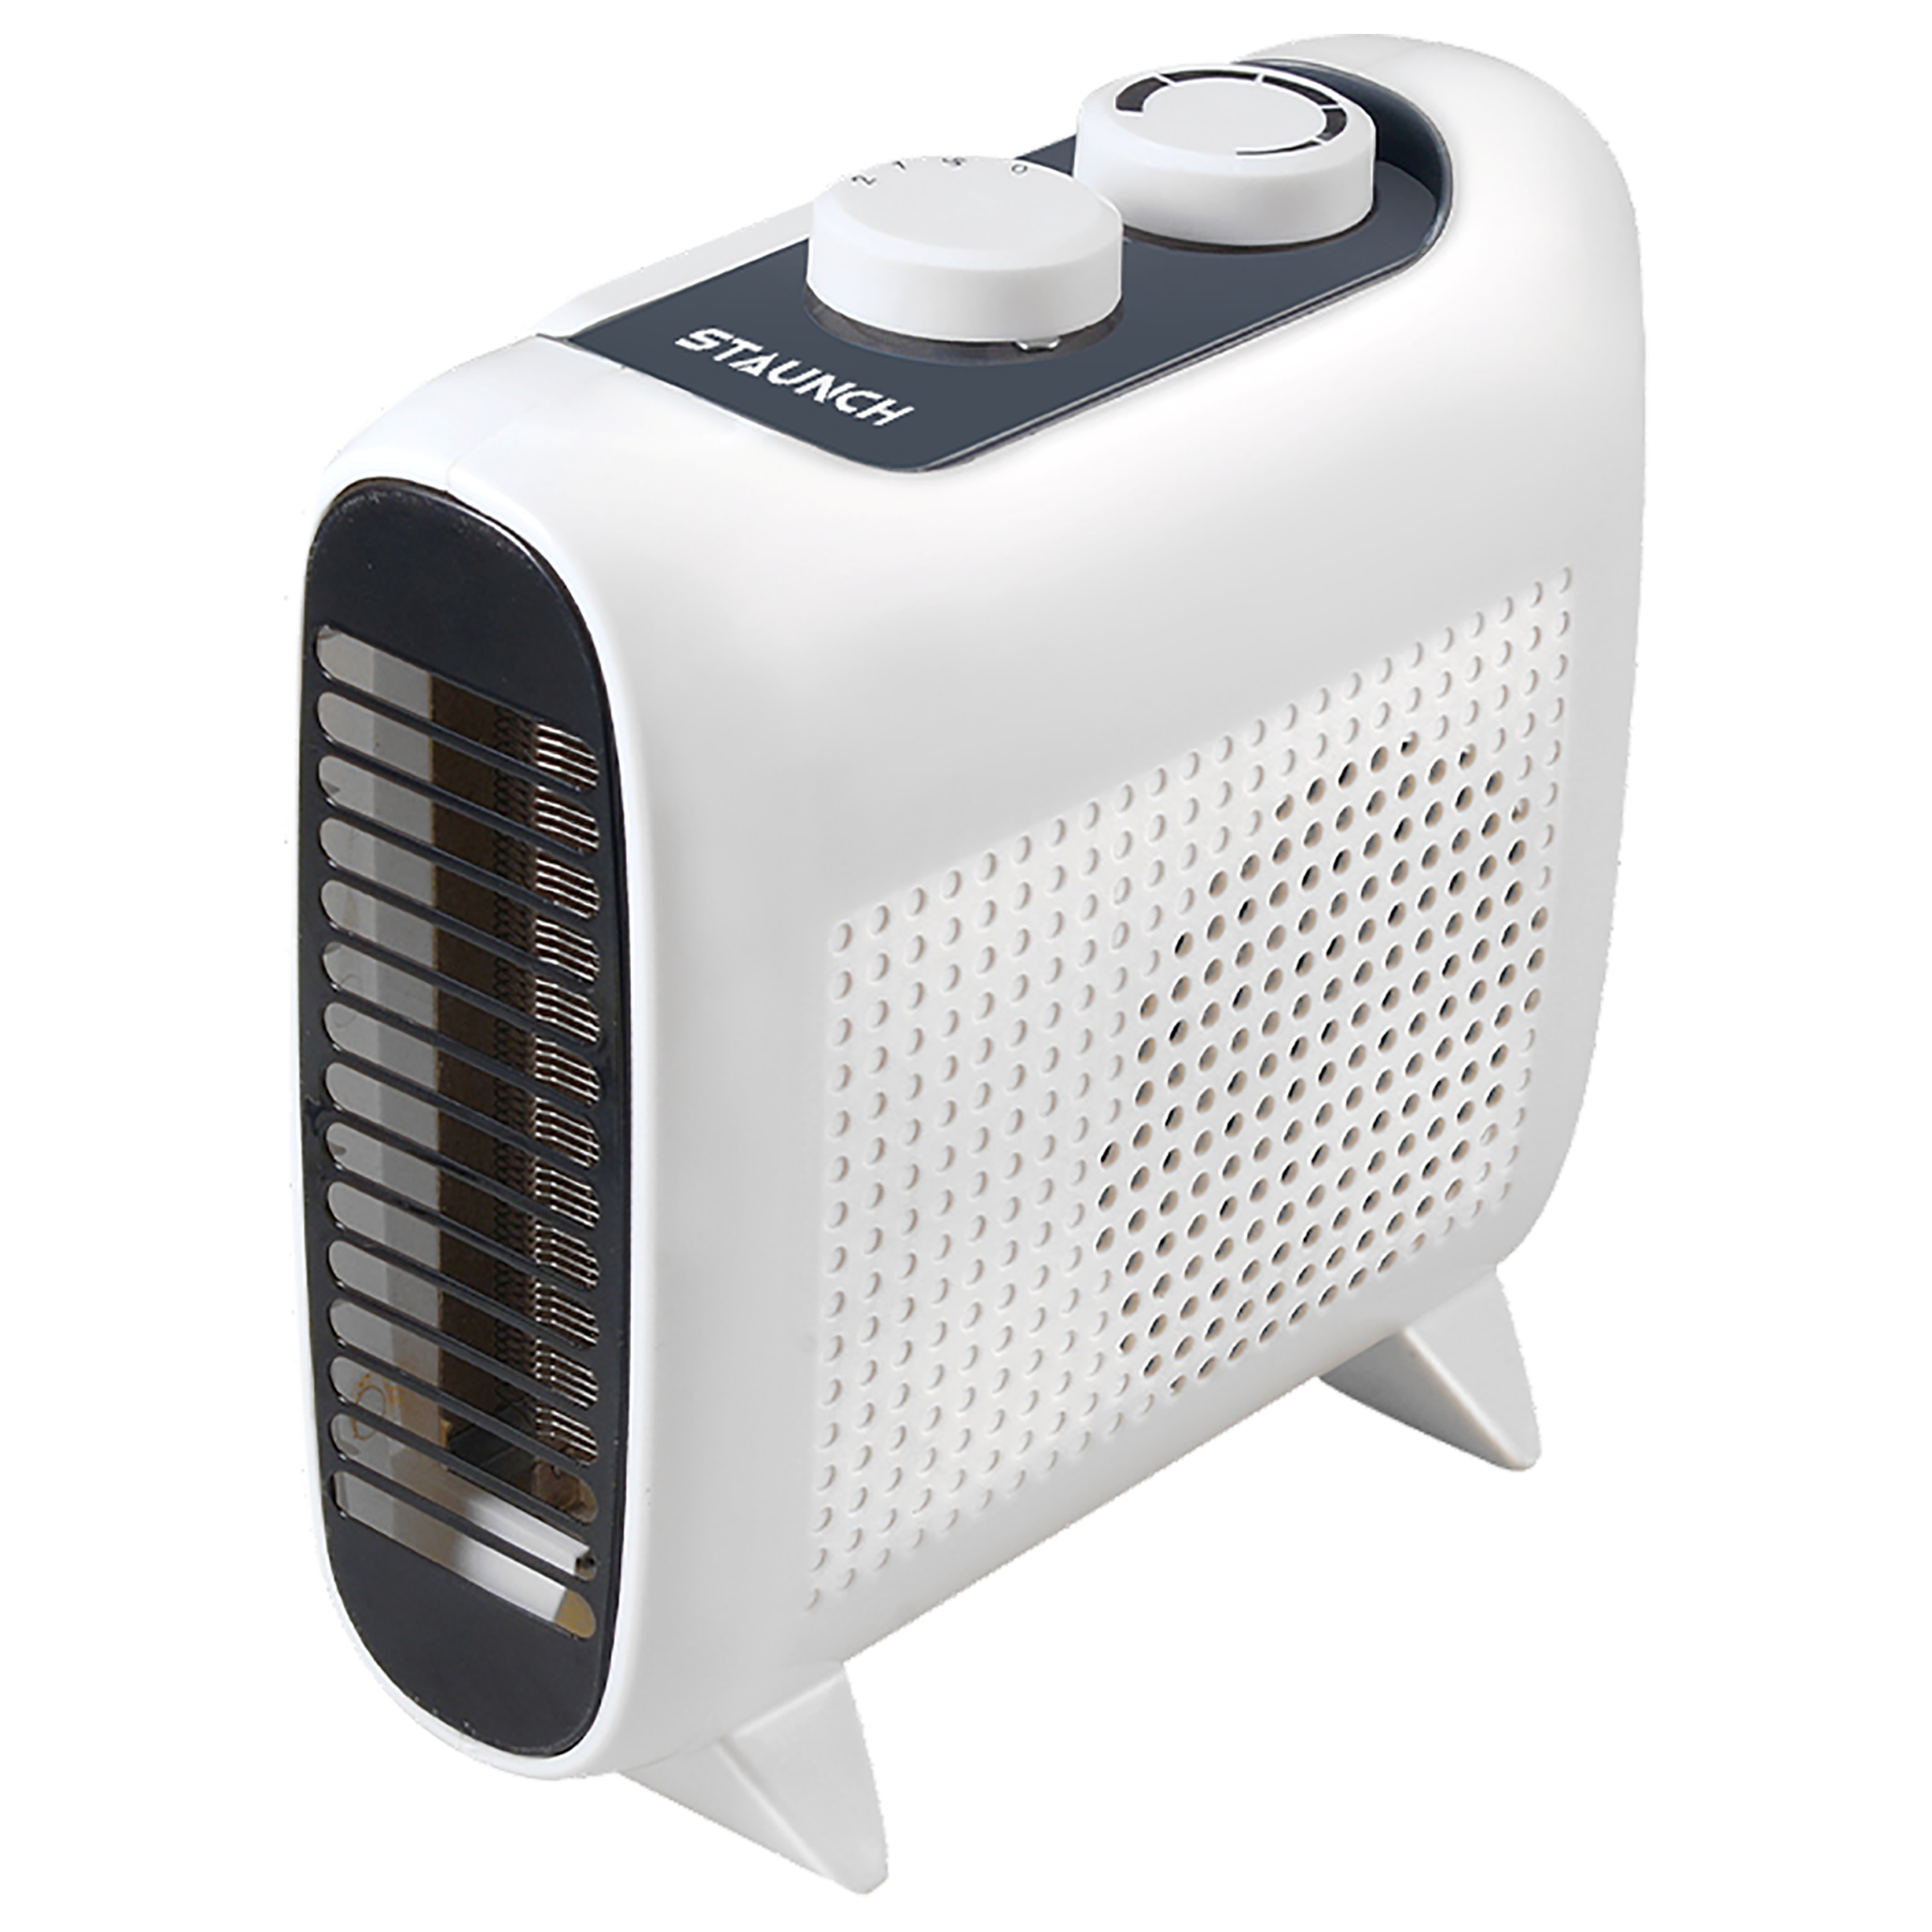 Staunch - Staunch SH-102 2000 Watts Fan Heater (Overheating Protection, White)